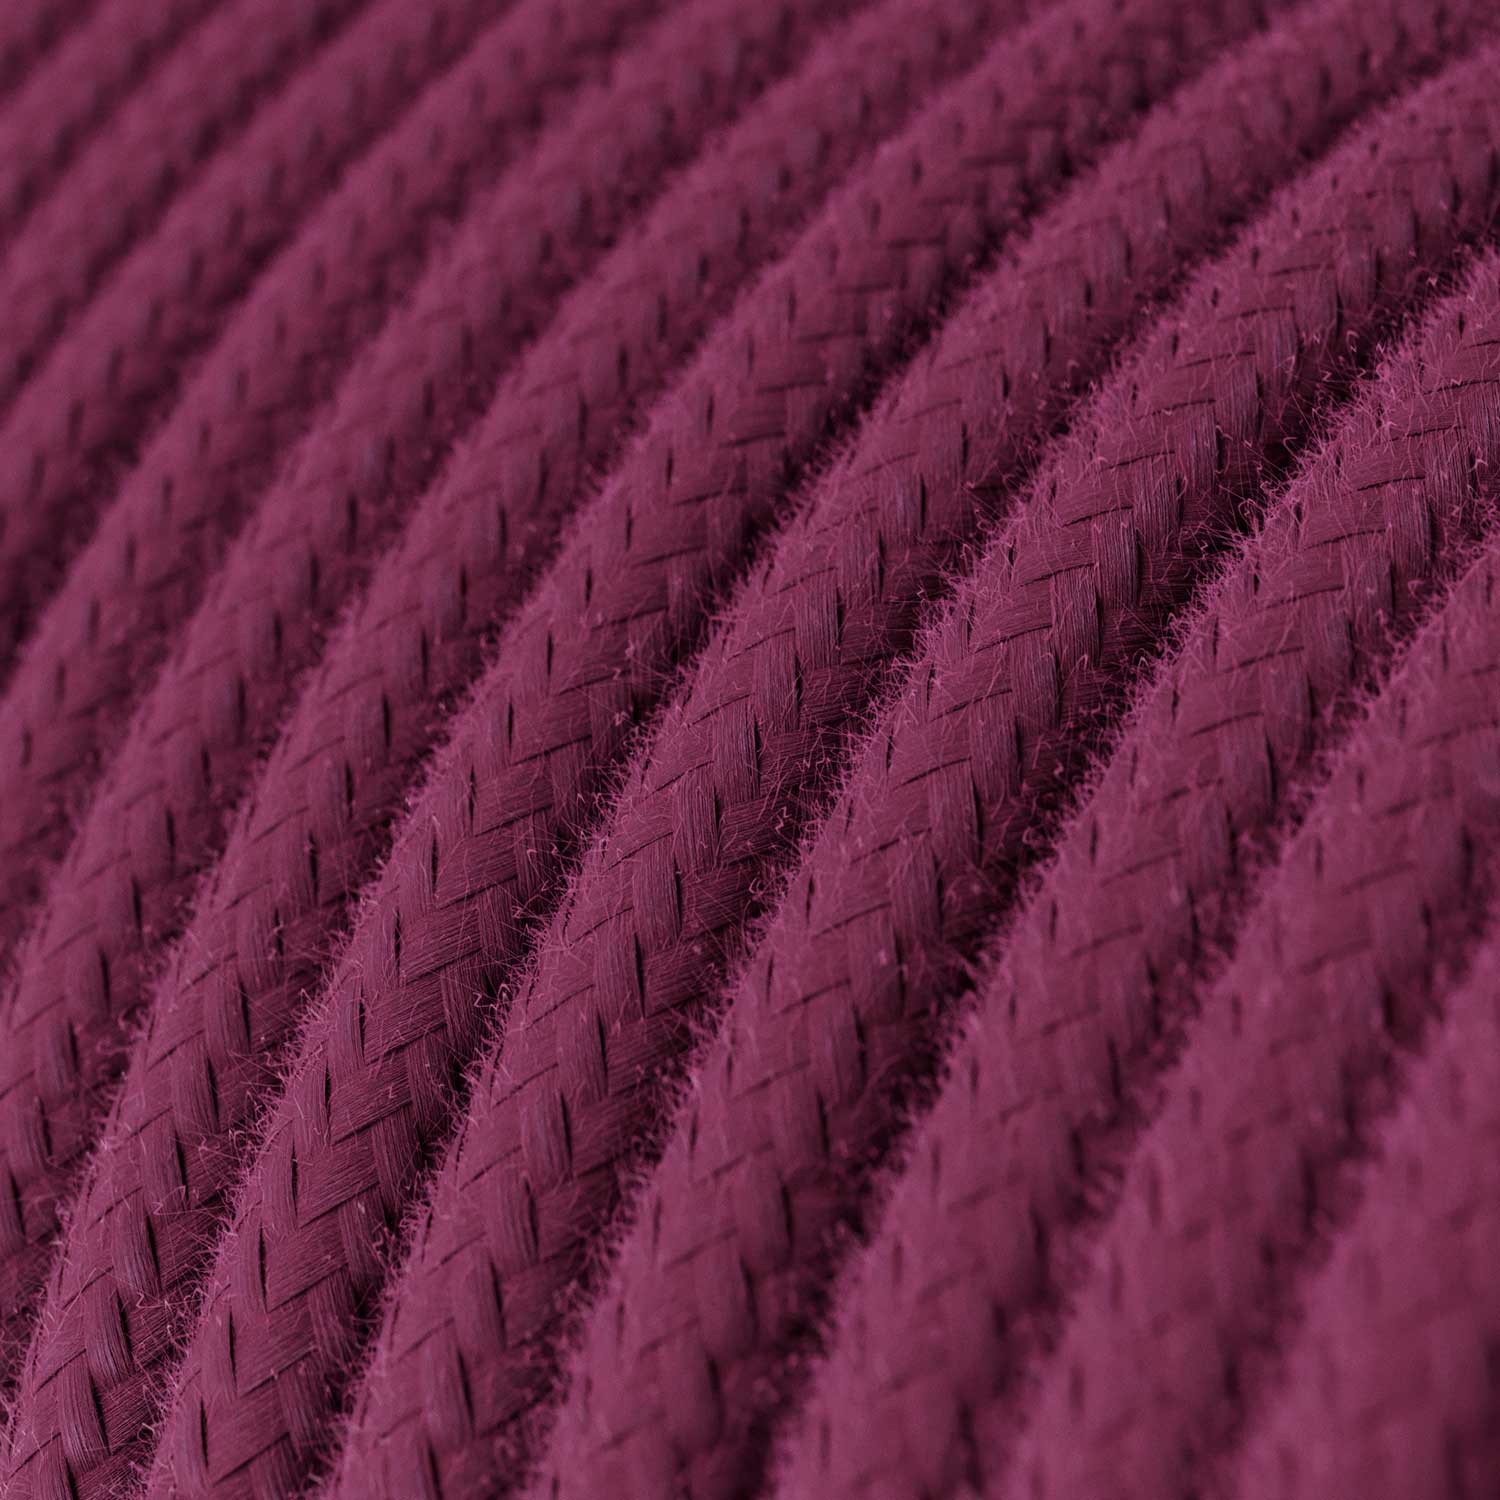 Round Electric Cable covered by Cotton solid colour fabric RC32 Burgundy